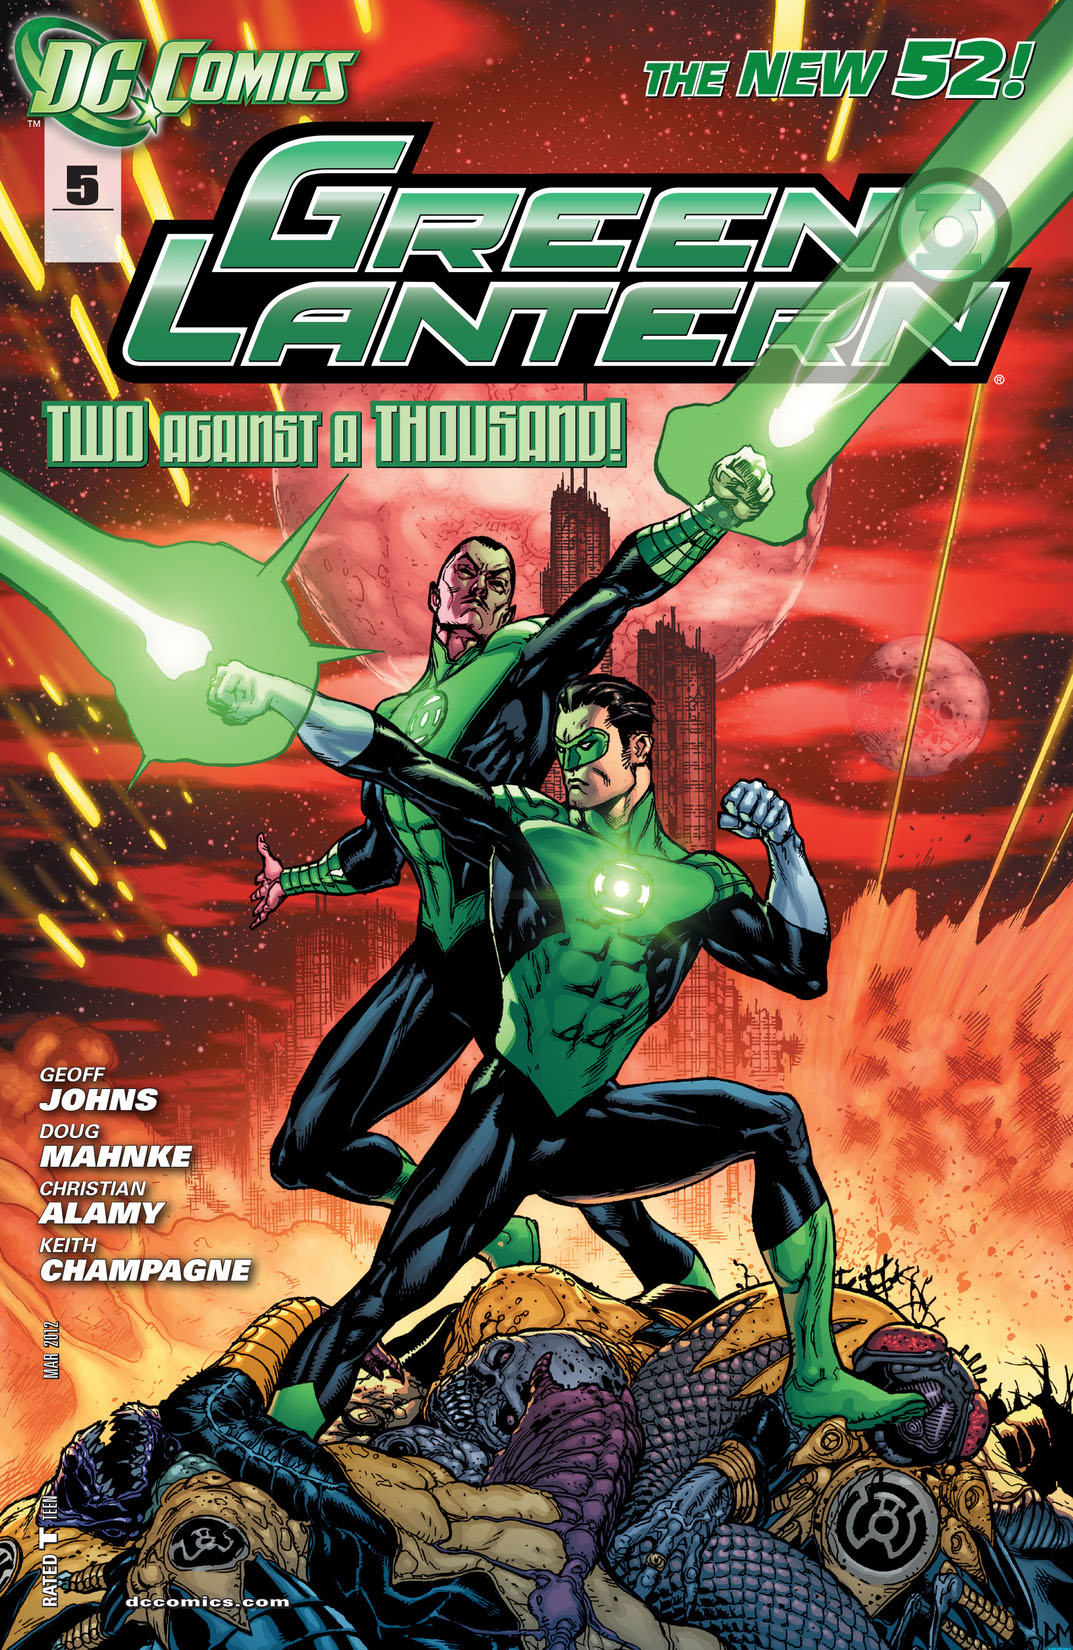 Green Lantern (2011-) #5 preview images